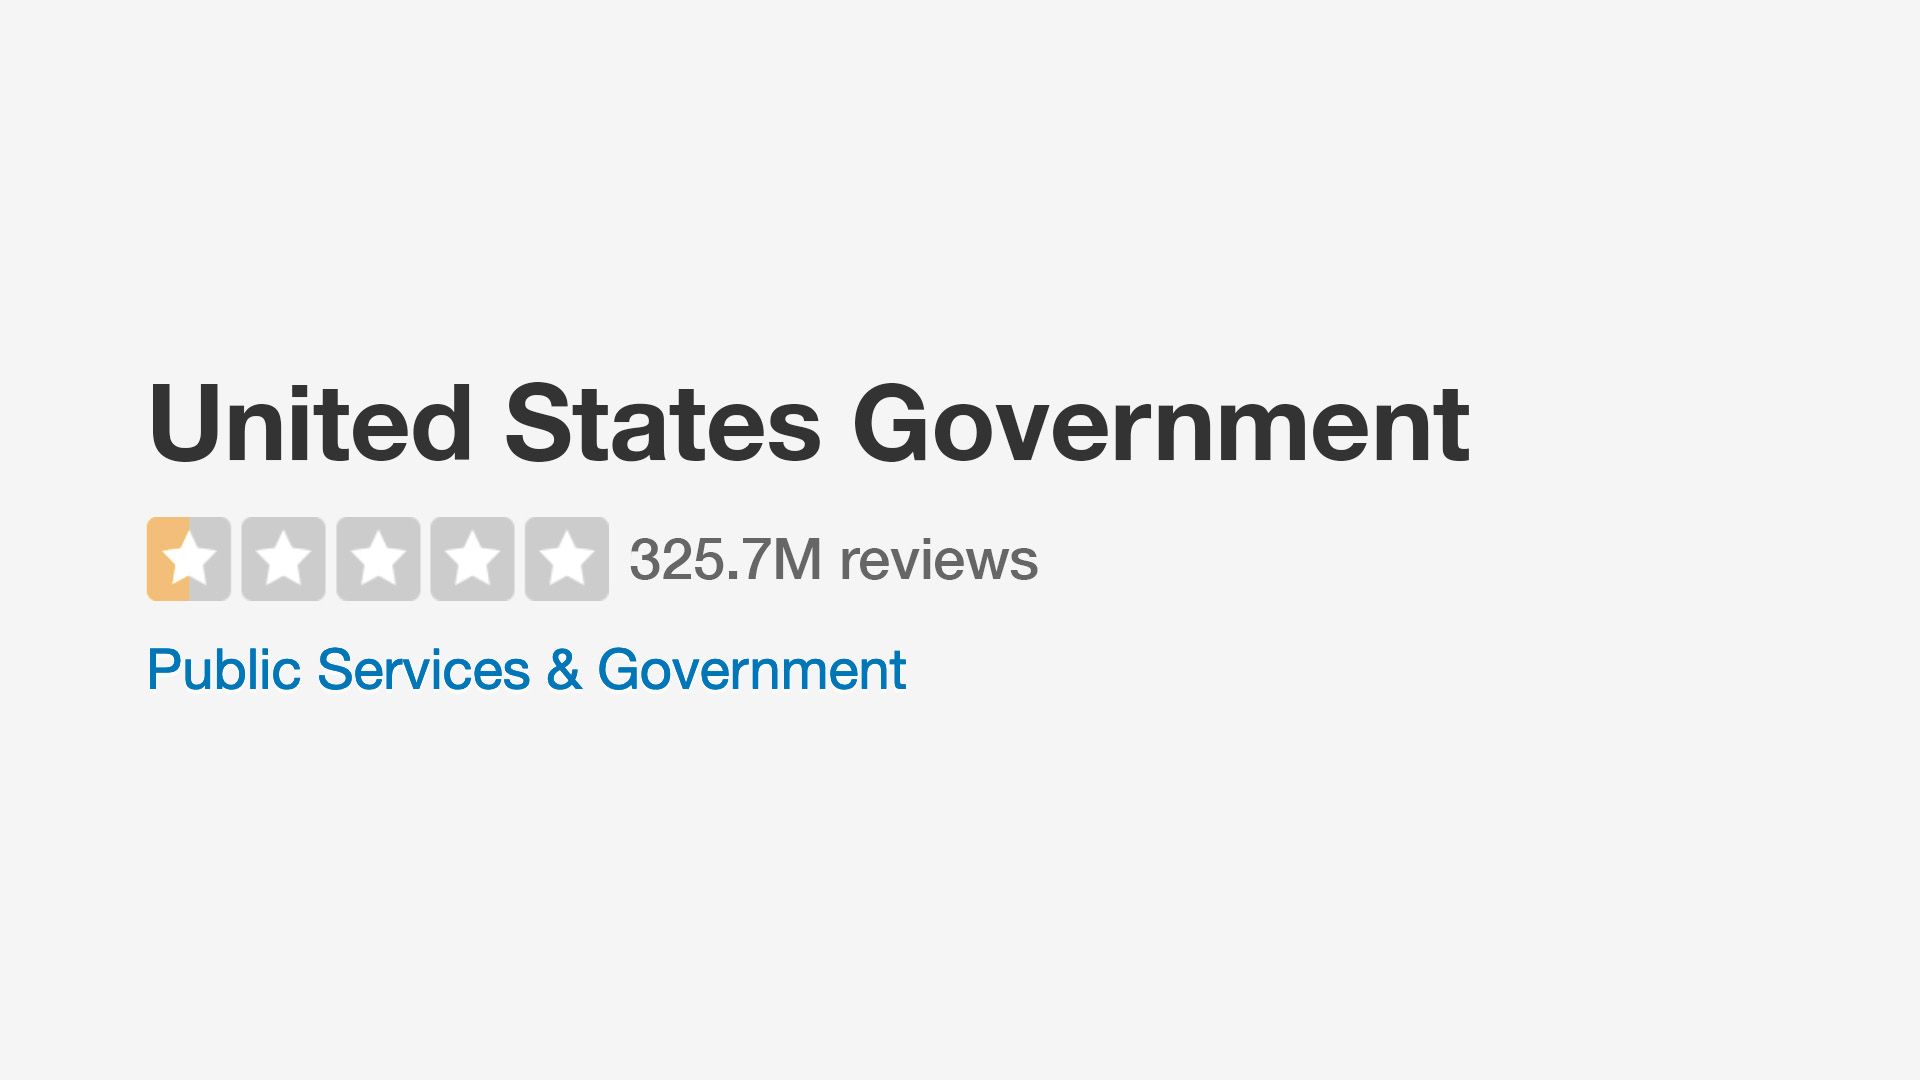 Illustration of the U.S. government with only half a star on Yelp